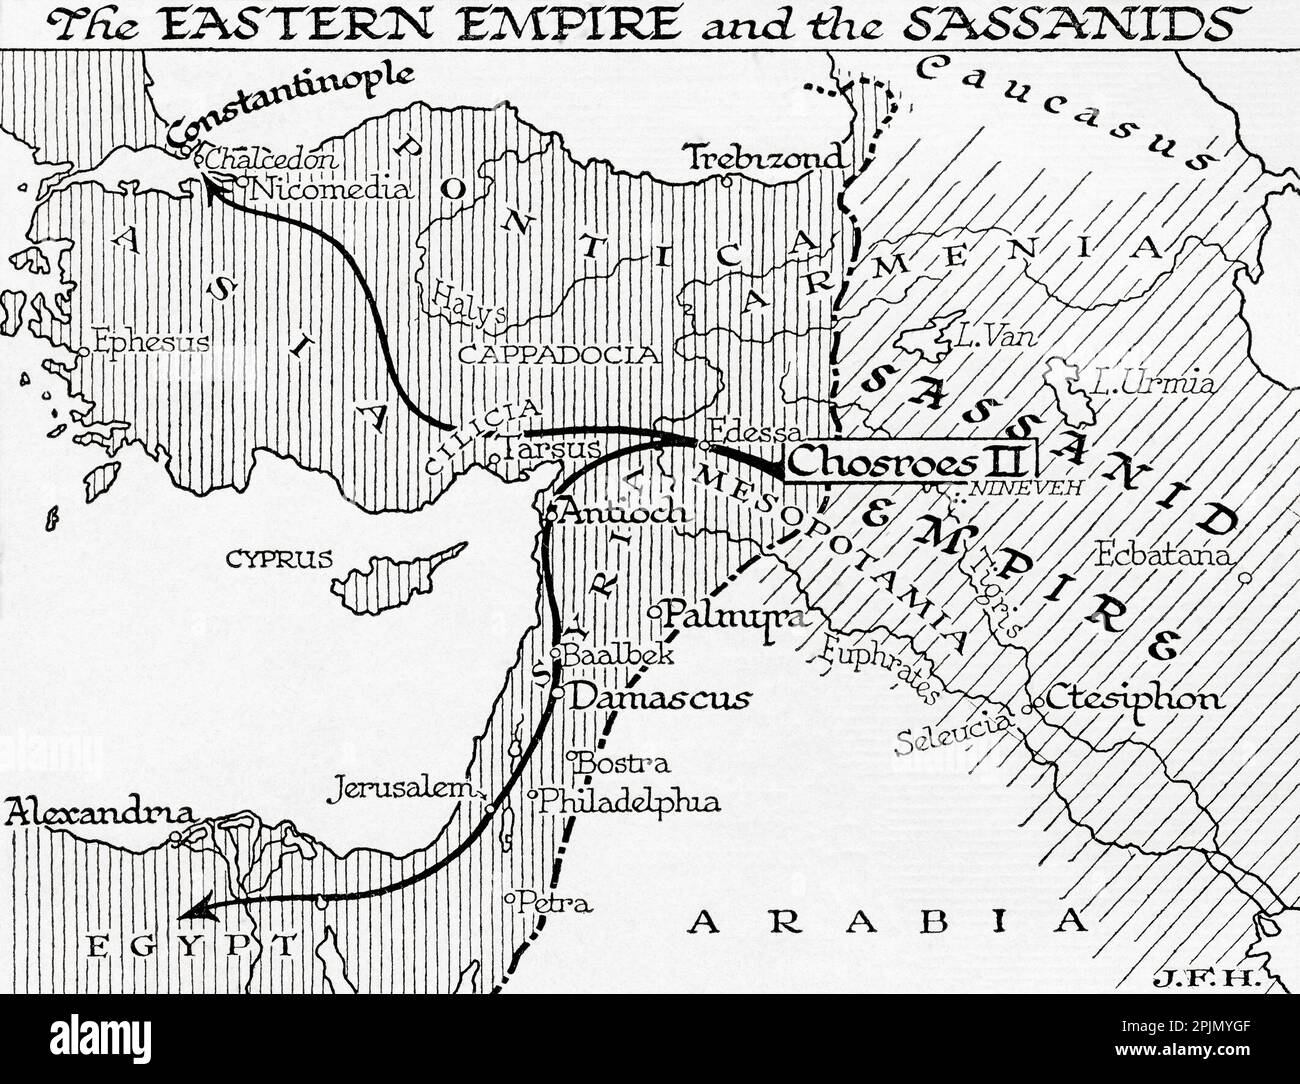 Map of the Eastern Empire and the Sassanids, 7th century.  From the book Outline of History by H.G. Wells, published 1920. Stock Photo